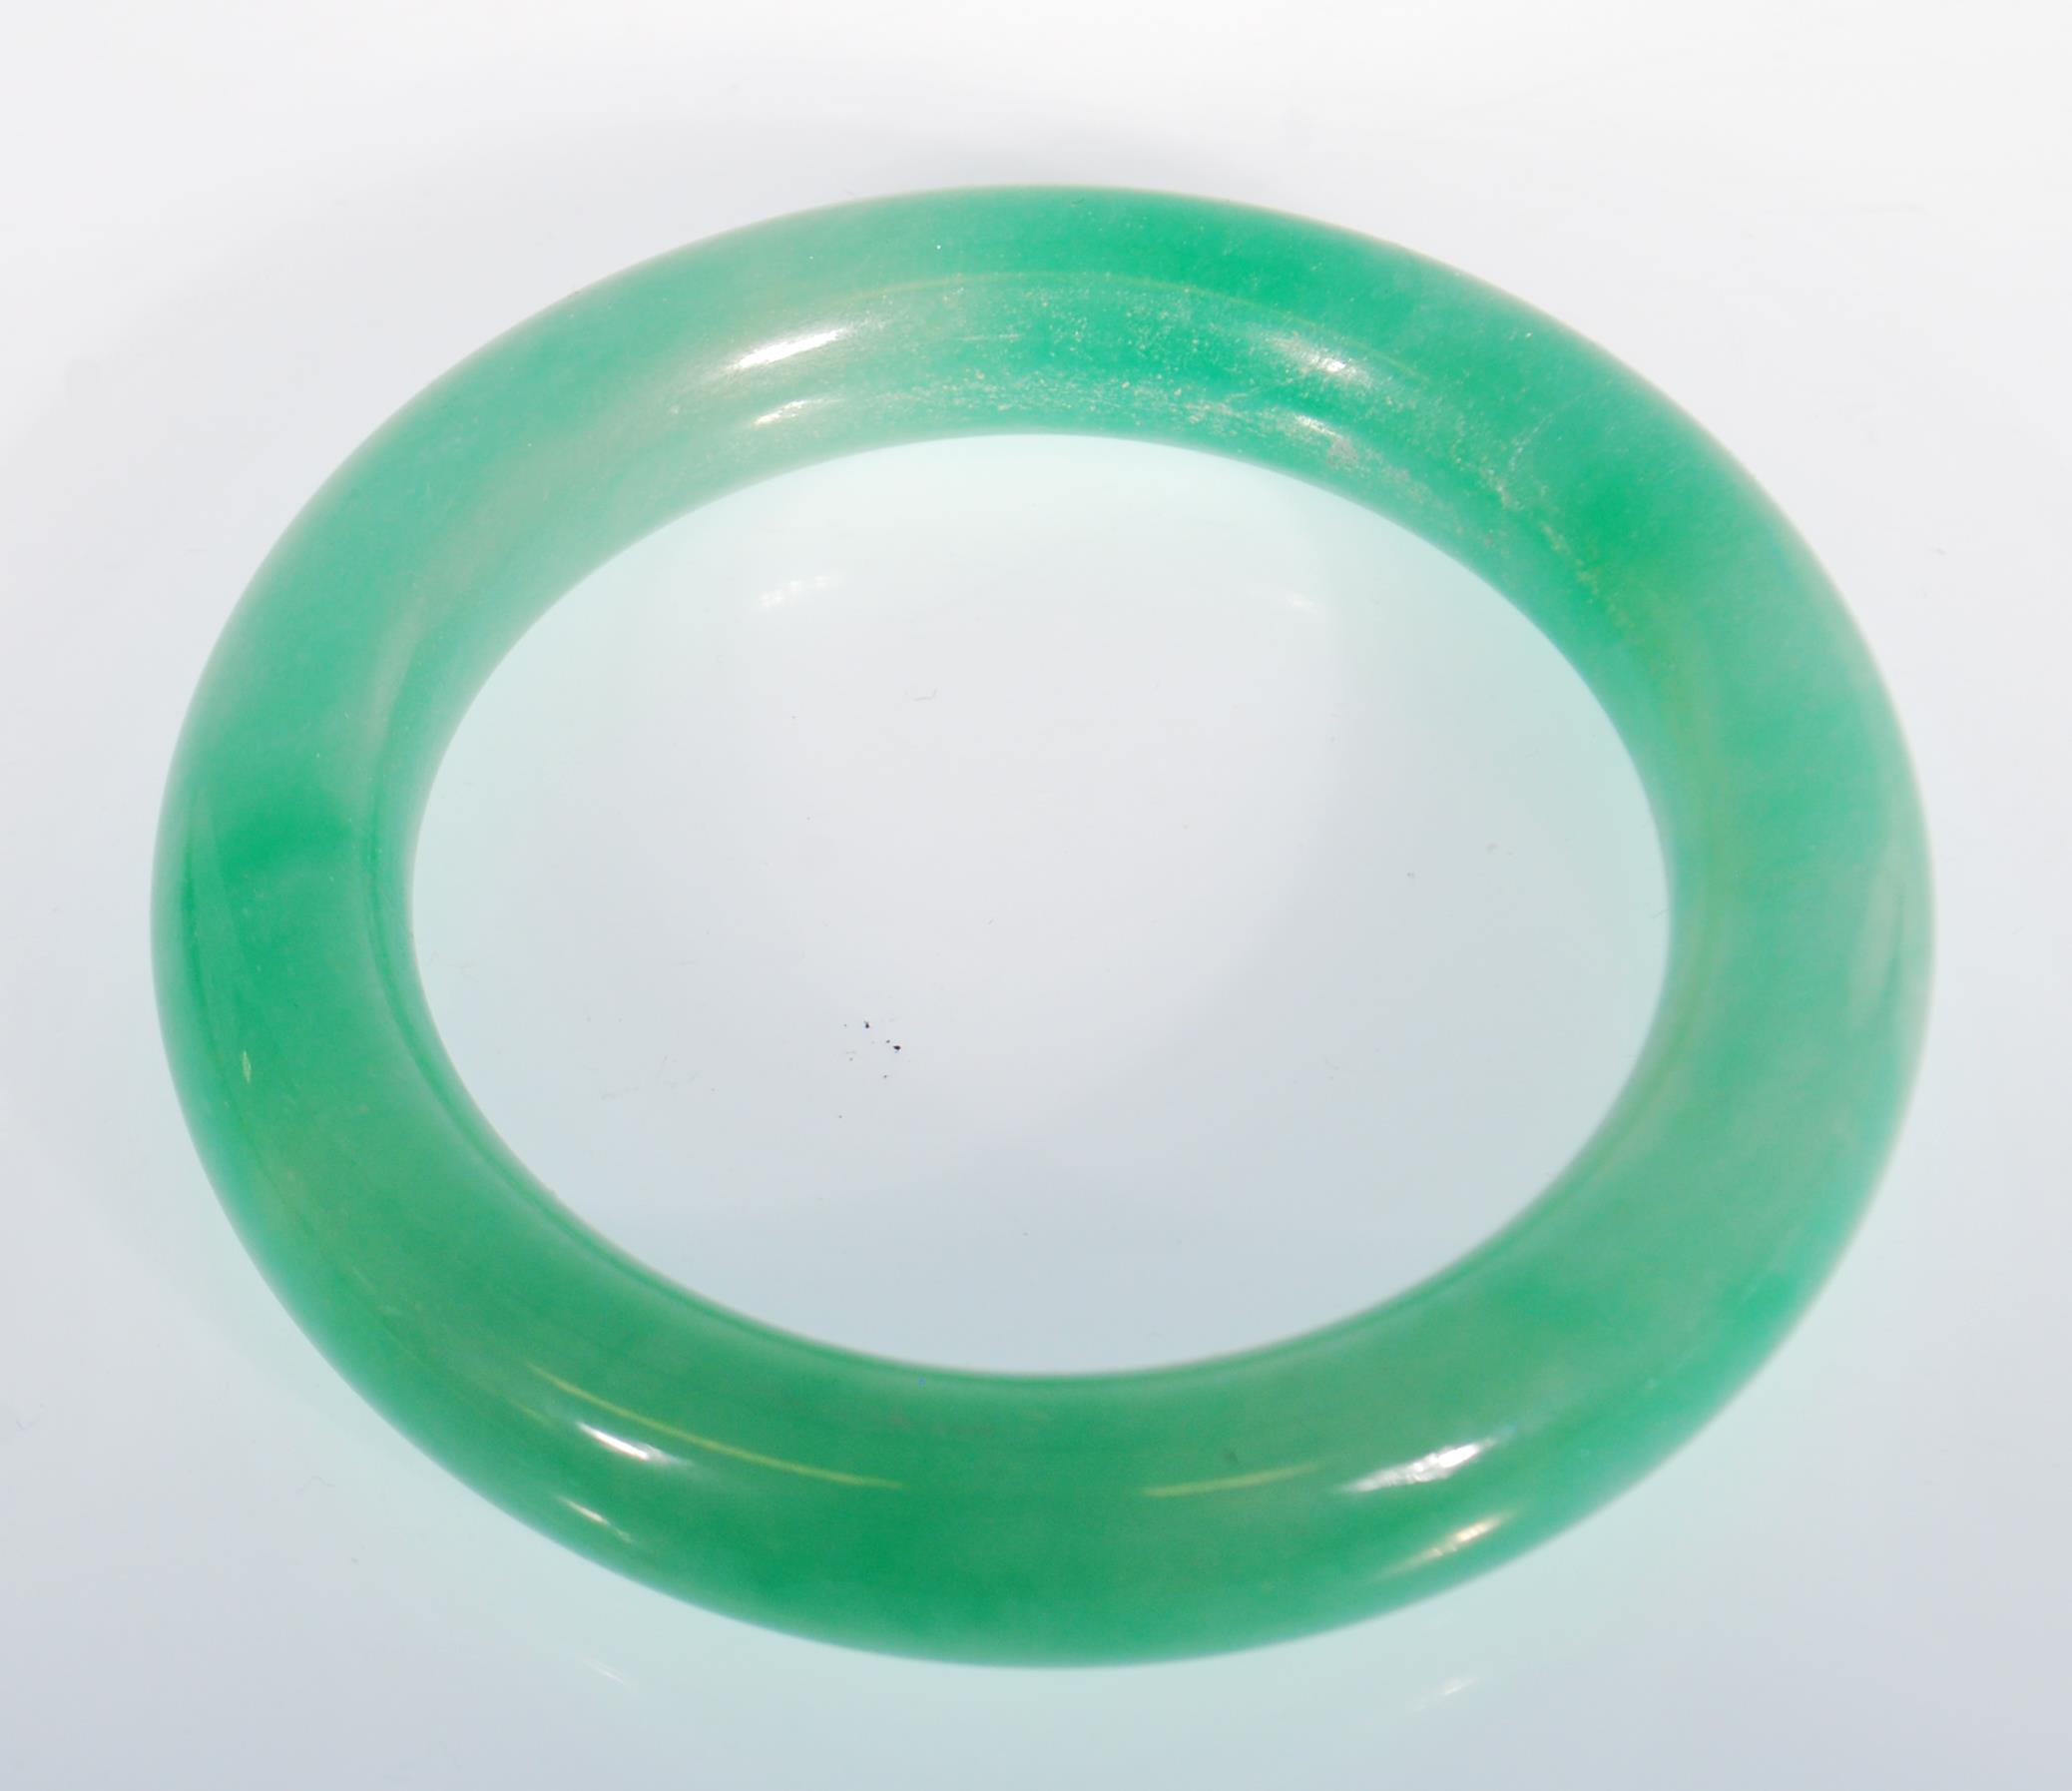 A Chinese green jade bangle of typical round form. Interior diameter 5.9g. Measures 99.4g.